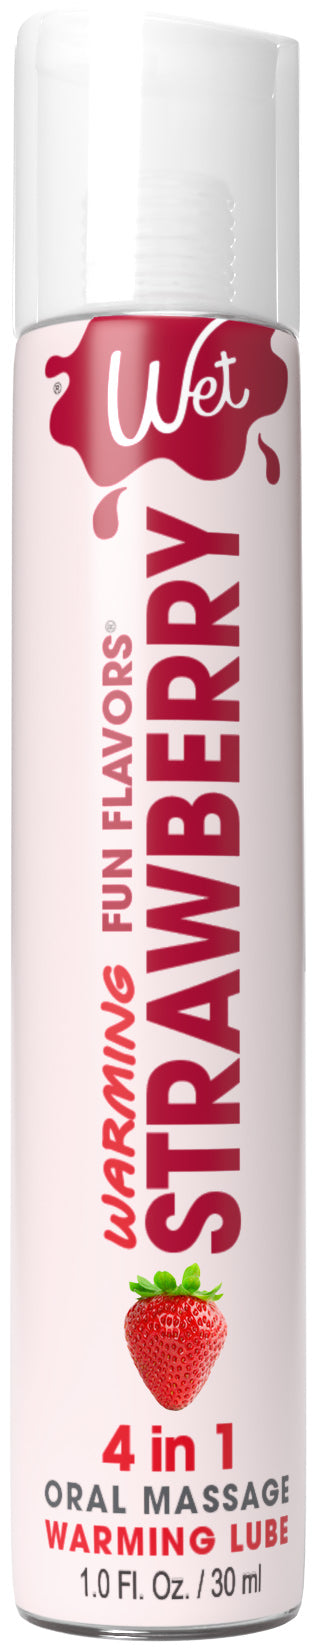 Wet Warming Fun Flavors - Strawberry - 4 in 1 Lubricant 1 Oz WT20442